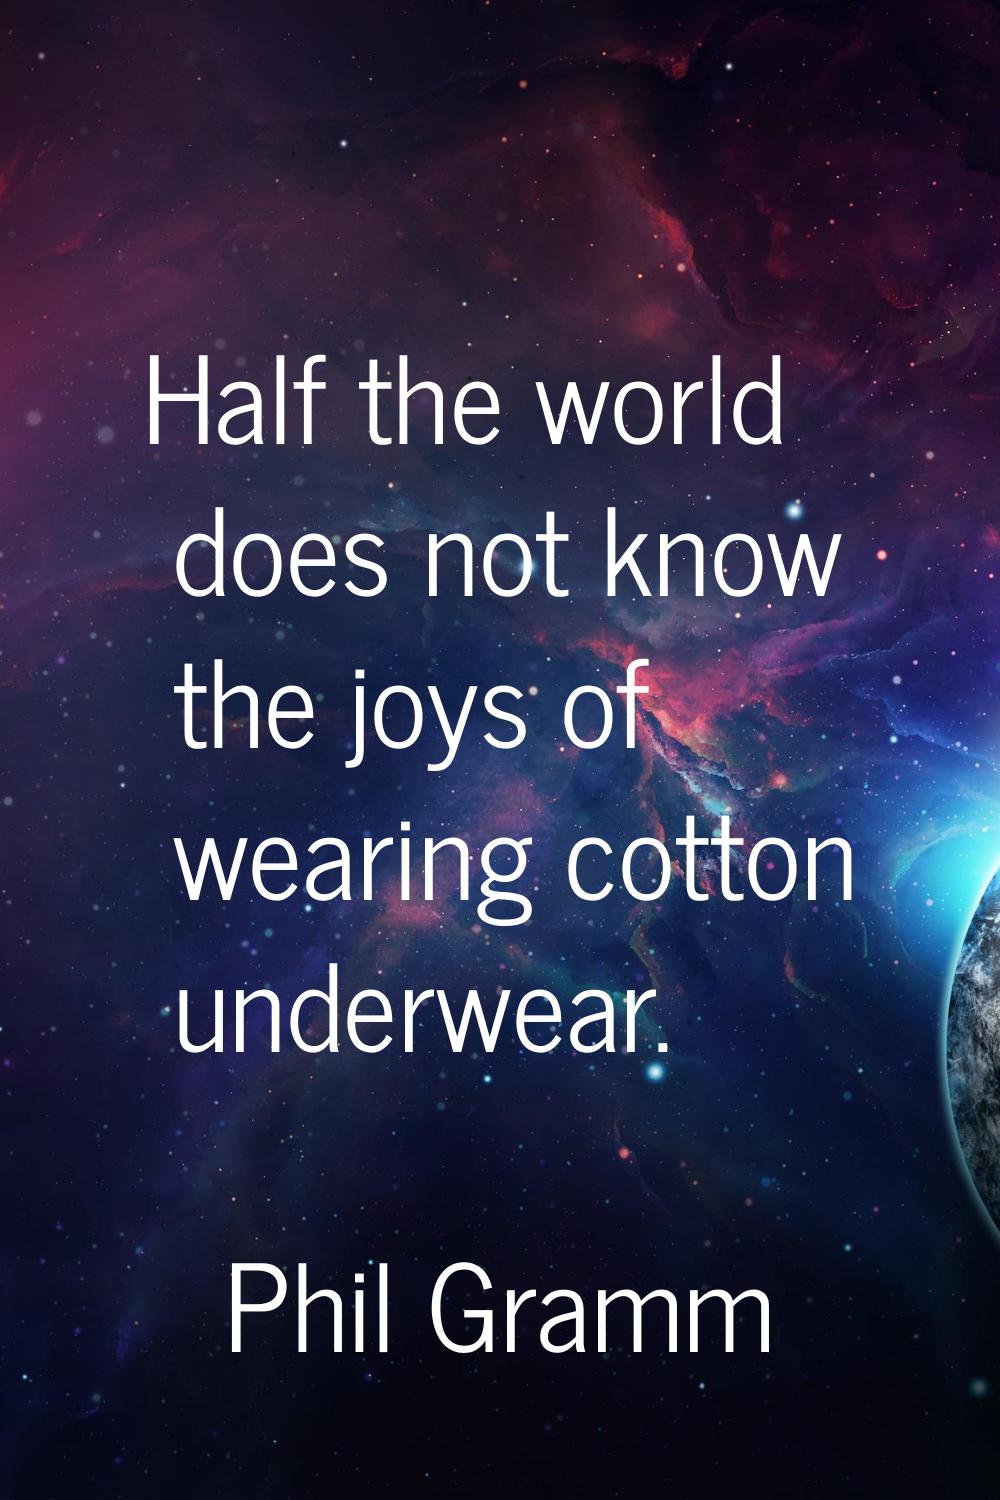 Half the world does not know the joys of wearing cotton underwear.